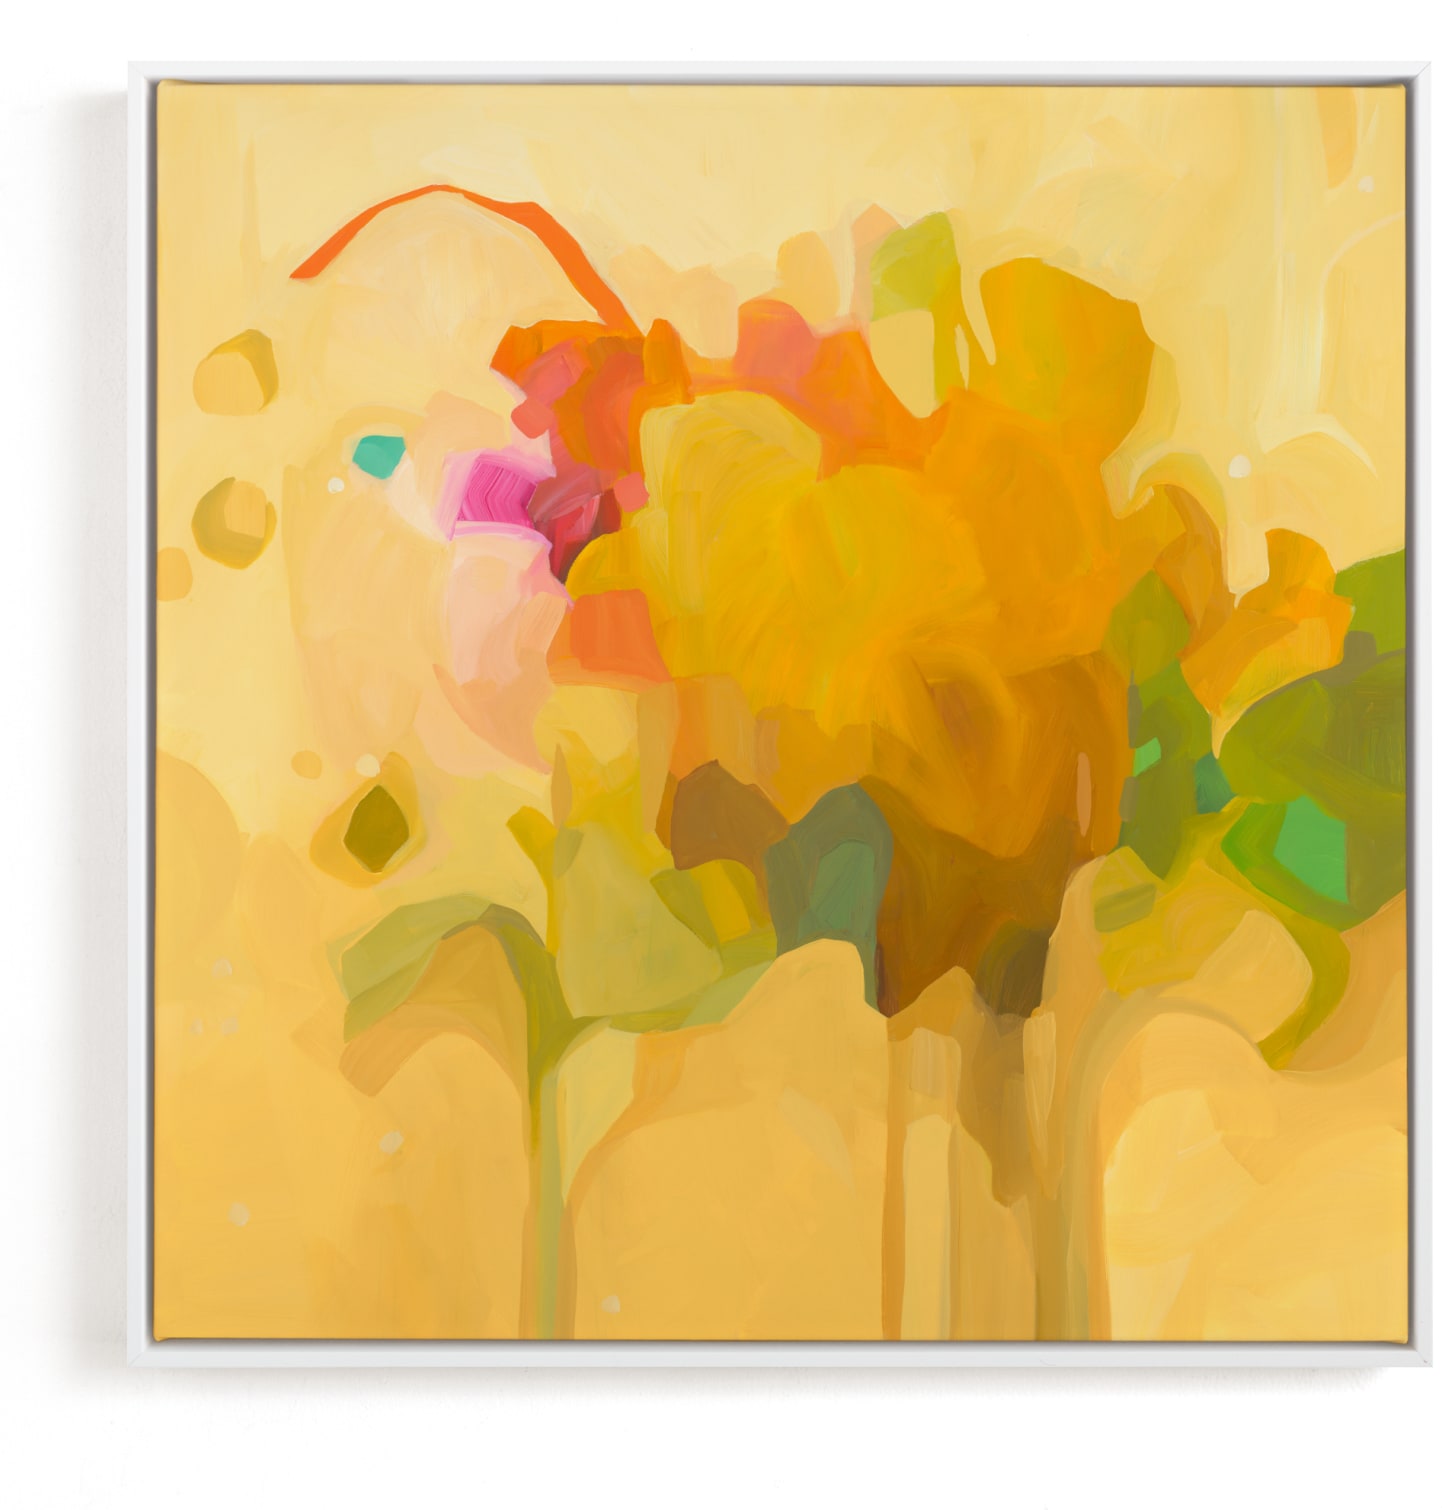 This is a yellow, pink, orange art by Susannah Bleasby called Sweetest Honey.